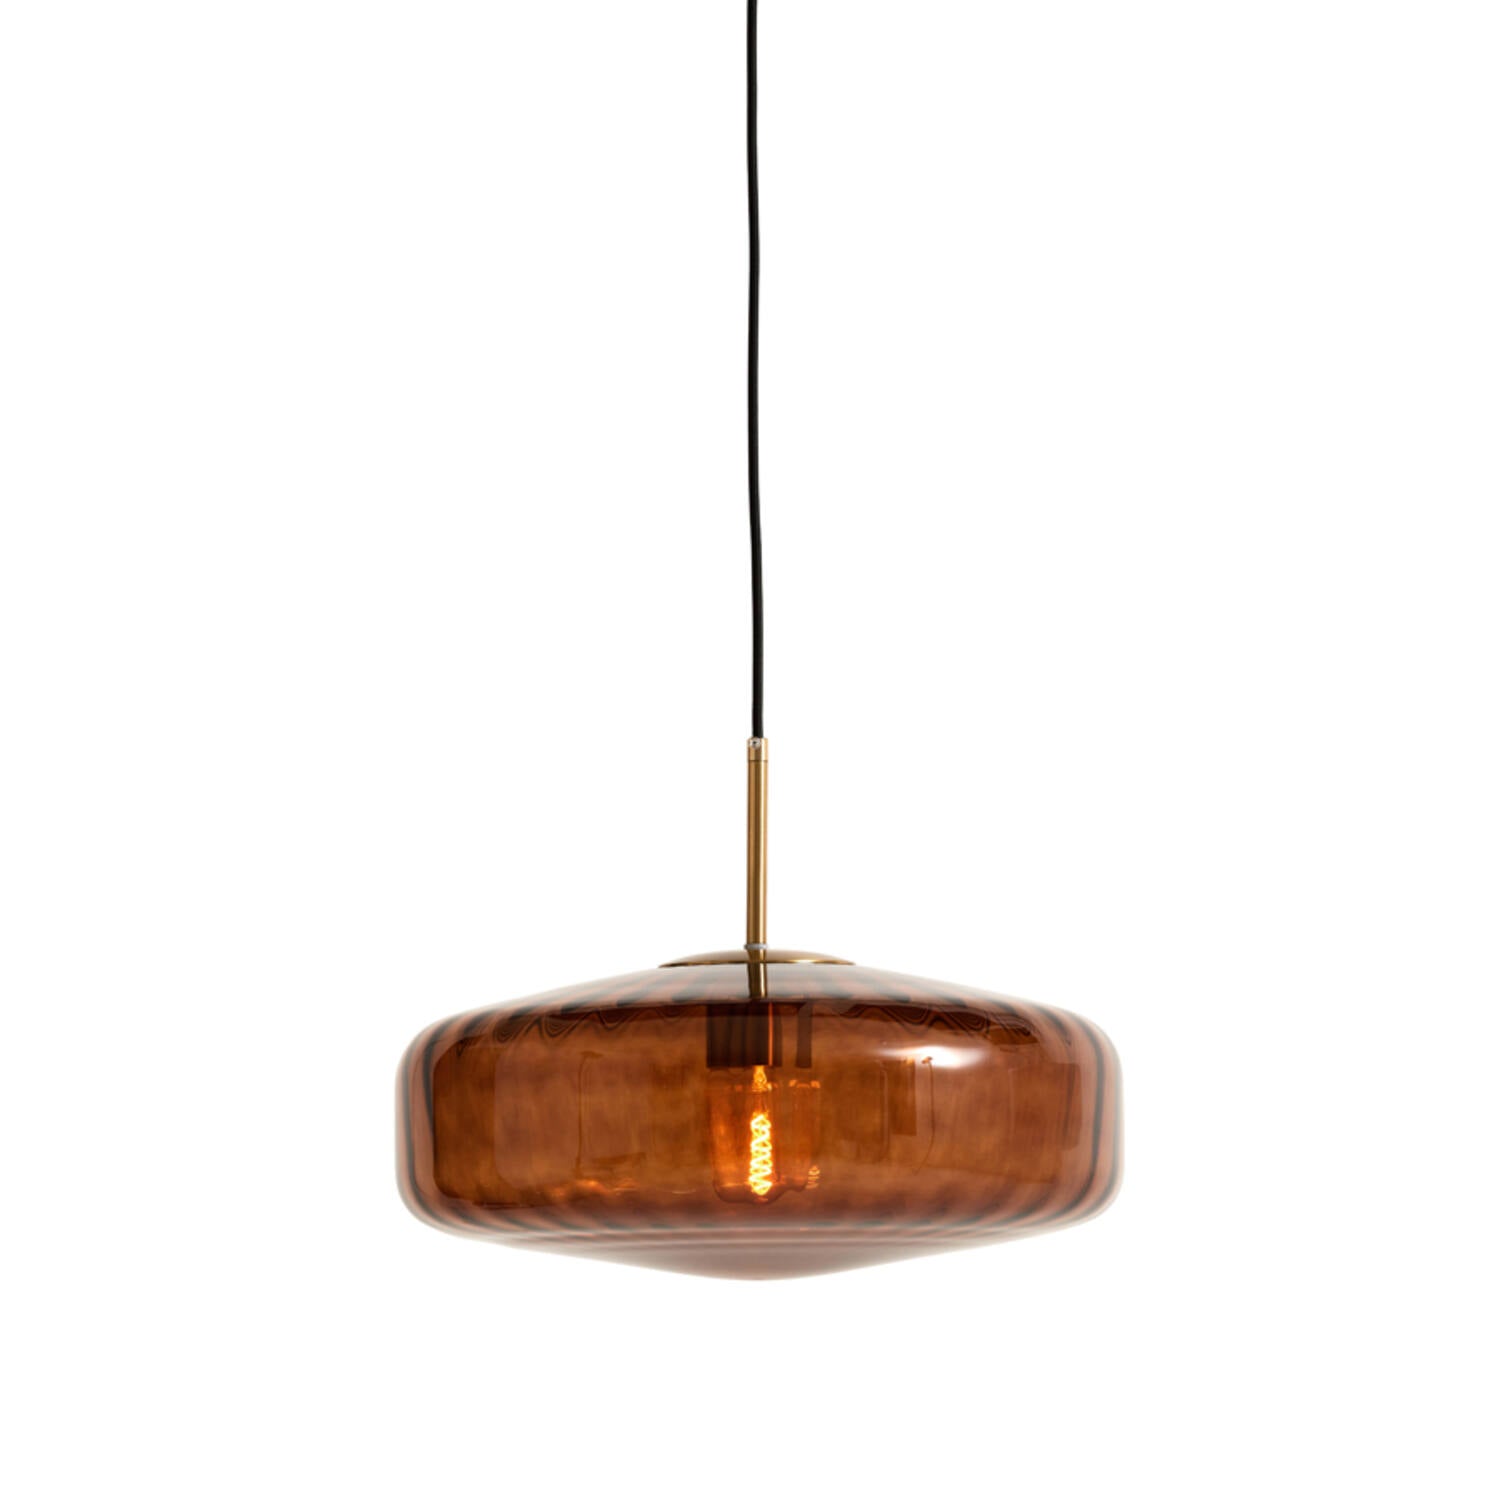 Pleat Hanging Lamp - Gold and Brown Glass